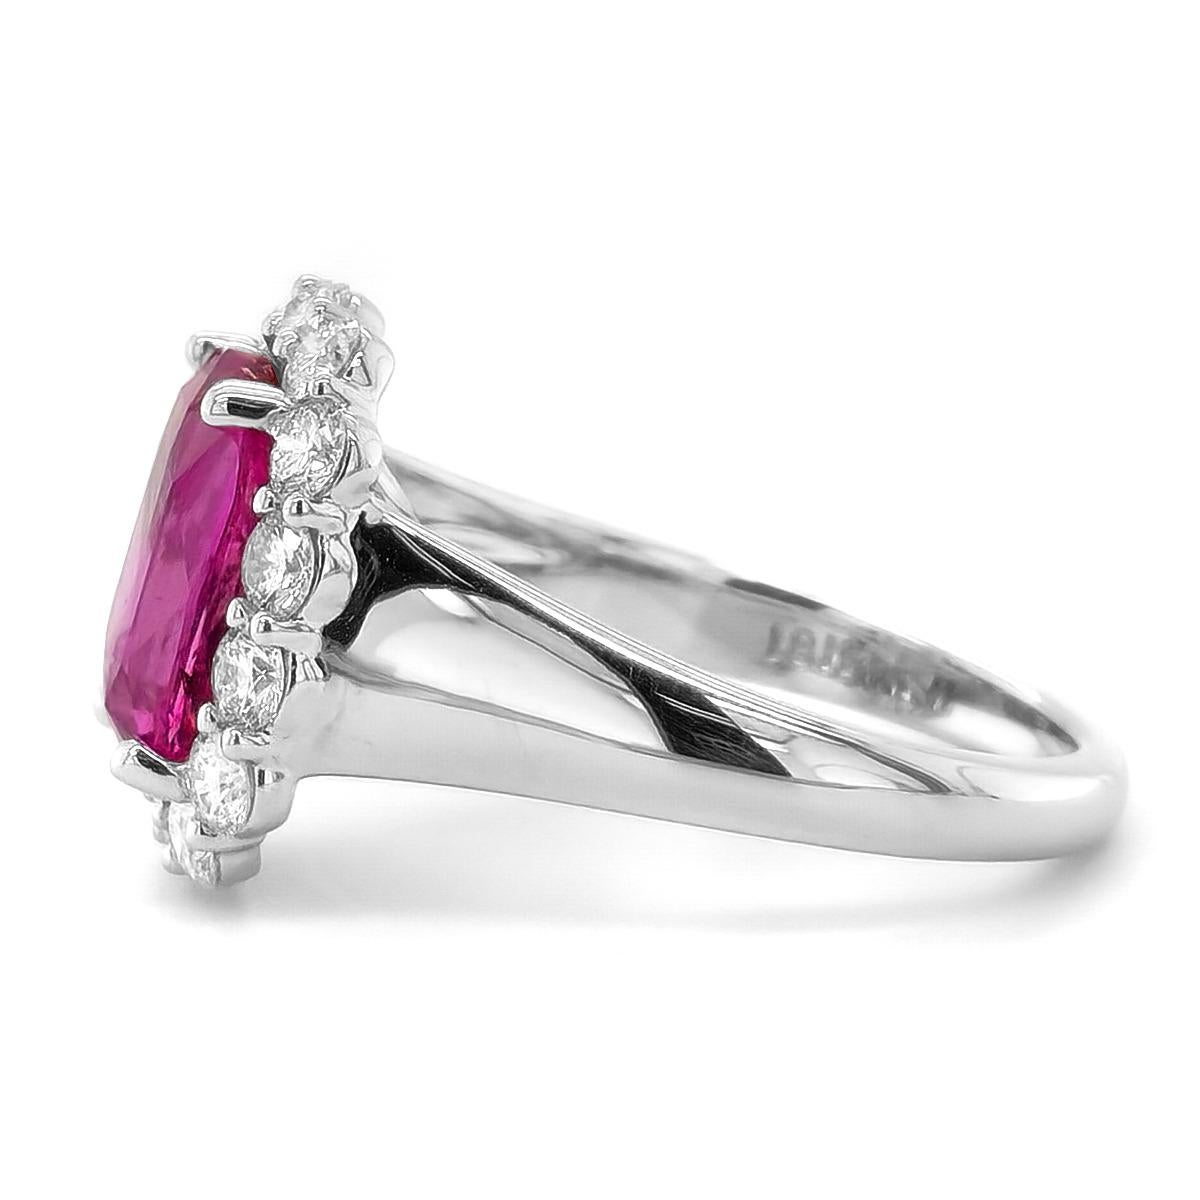 Brilliant Cut GIA Certified 4.54 Carat Madagascar Pink Sapphire Diamond 18k White Gold Ring For Sale